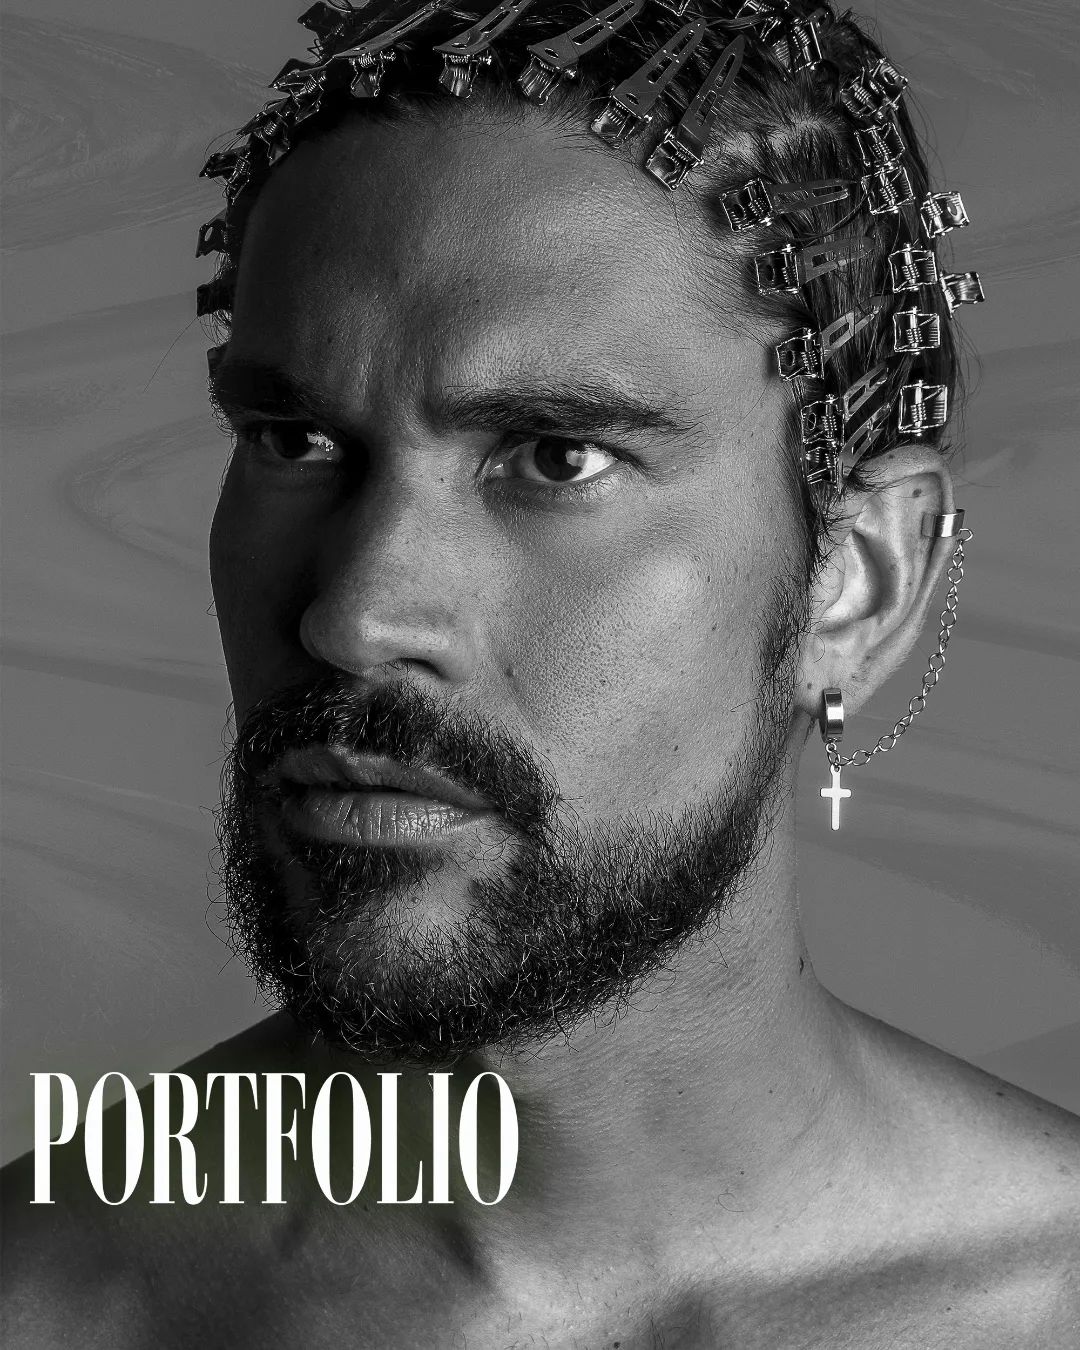 https://d.radikal.host/2023/04/06/Photo-by-REVISTA-PORTFOLIO-BRAZIL-on-March-19-2023.-May-be-a-closeup-of-1-person-beard-and-text-that-says--PORTFOLIO..jpg